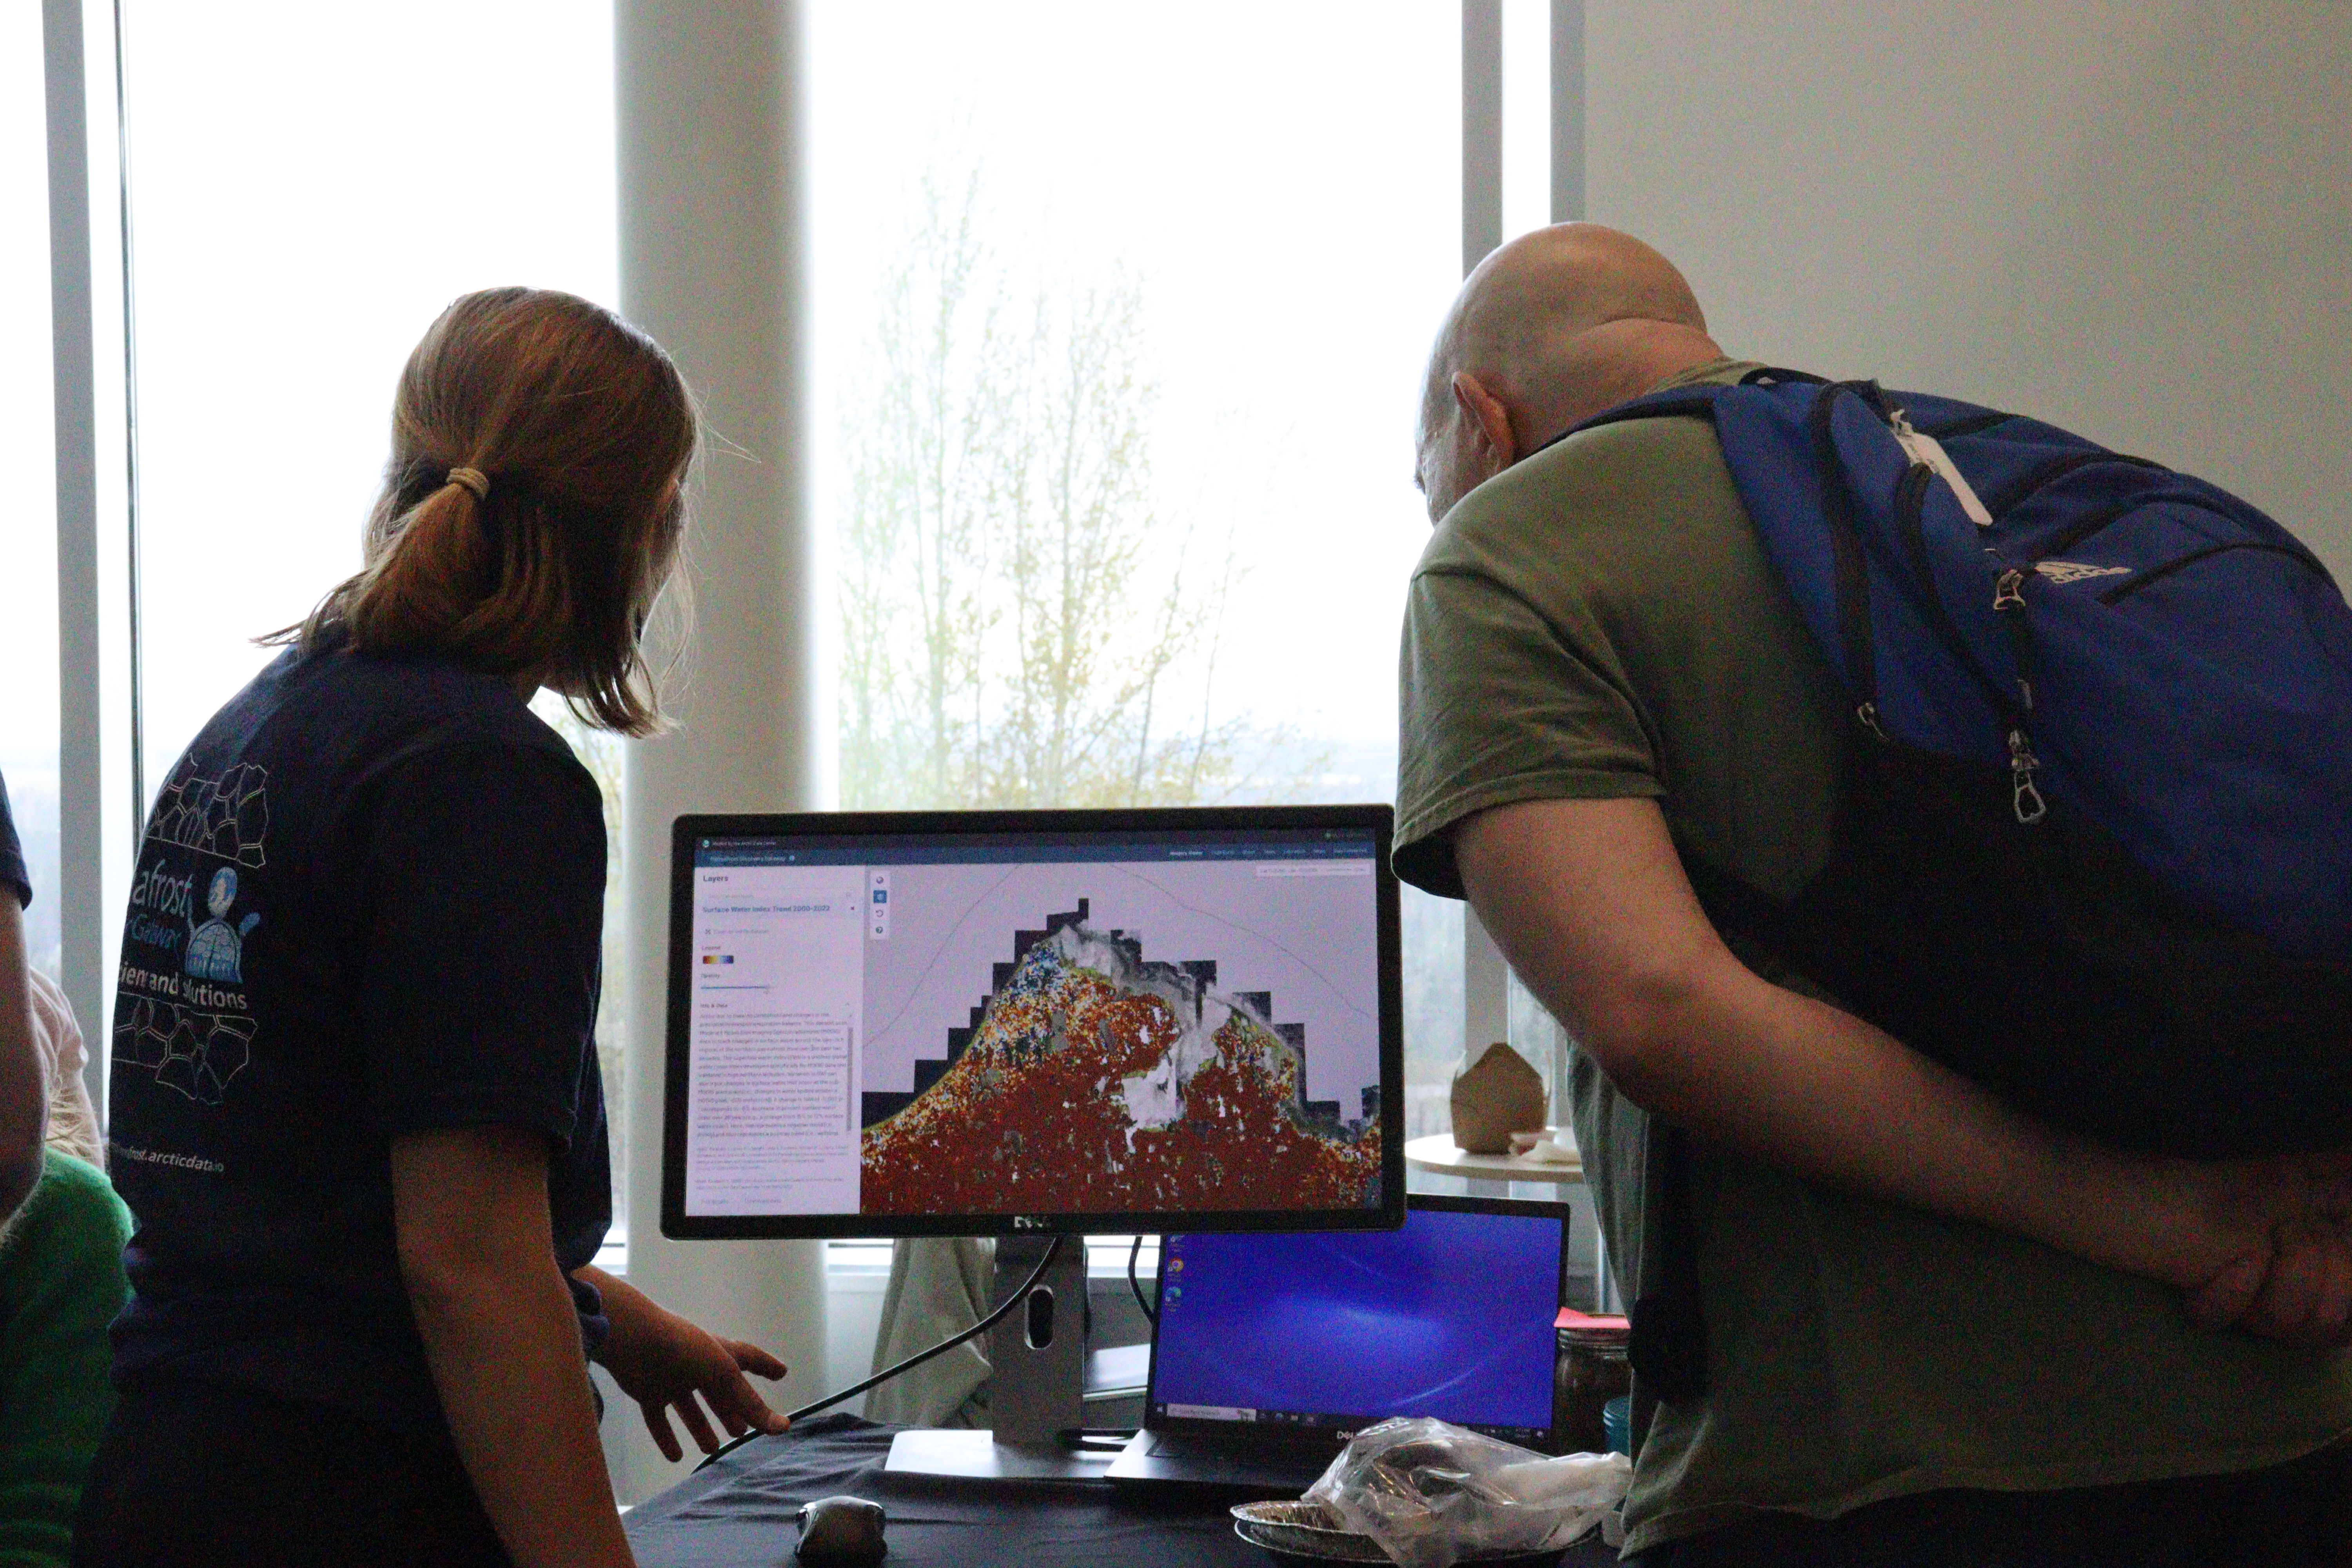 A woman, left, and a man, right, examine a computer monitor displaying the Permafrost Discovery Gateway interface, which looks like a map covered in different colored squares. 